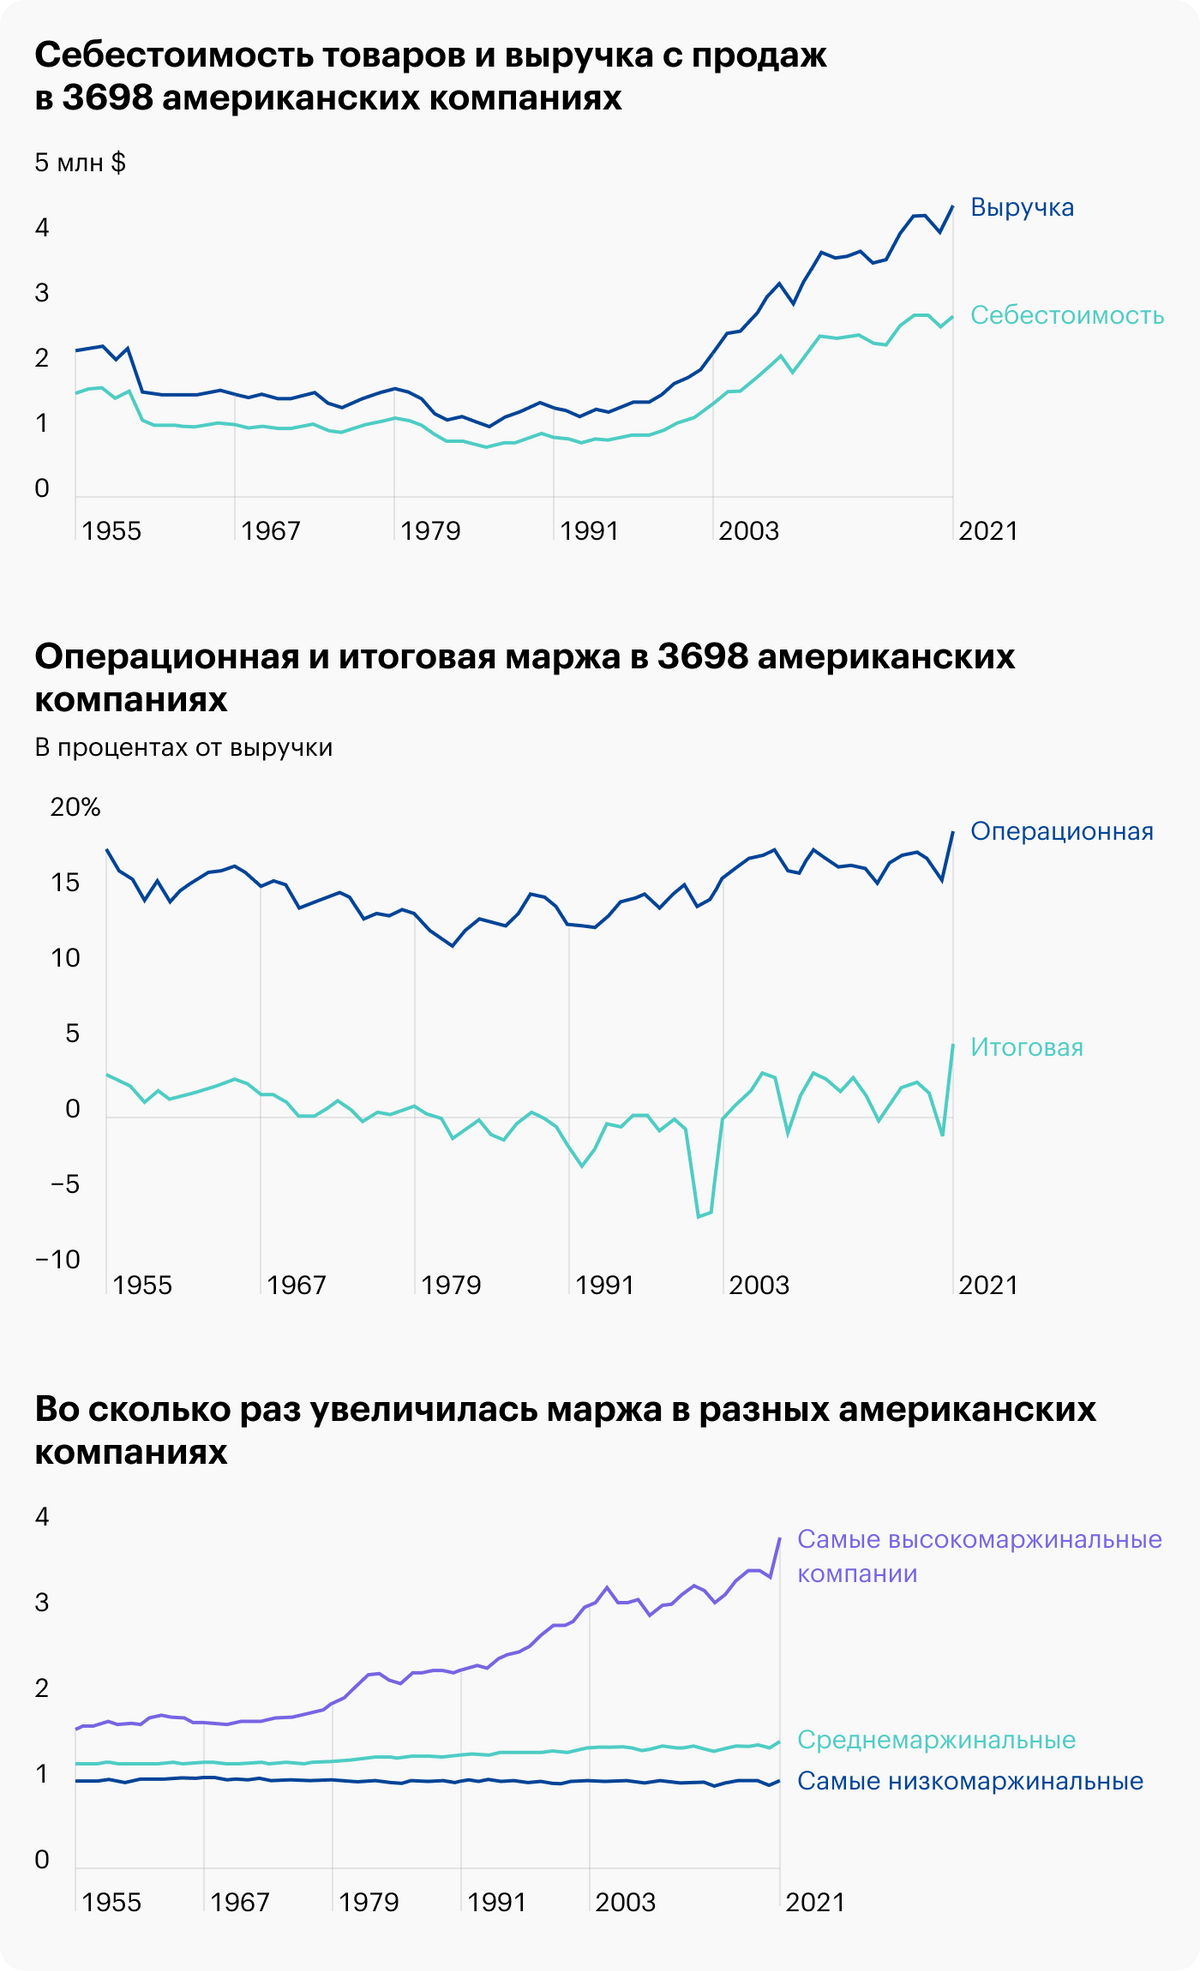 Источник: Roosevelt Institute, Prices, Profits, and Power: An Analysis of 2021 Firm-Level Markups, стр. 5, 6